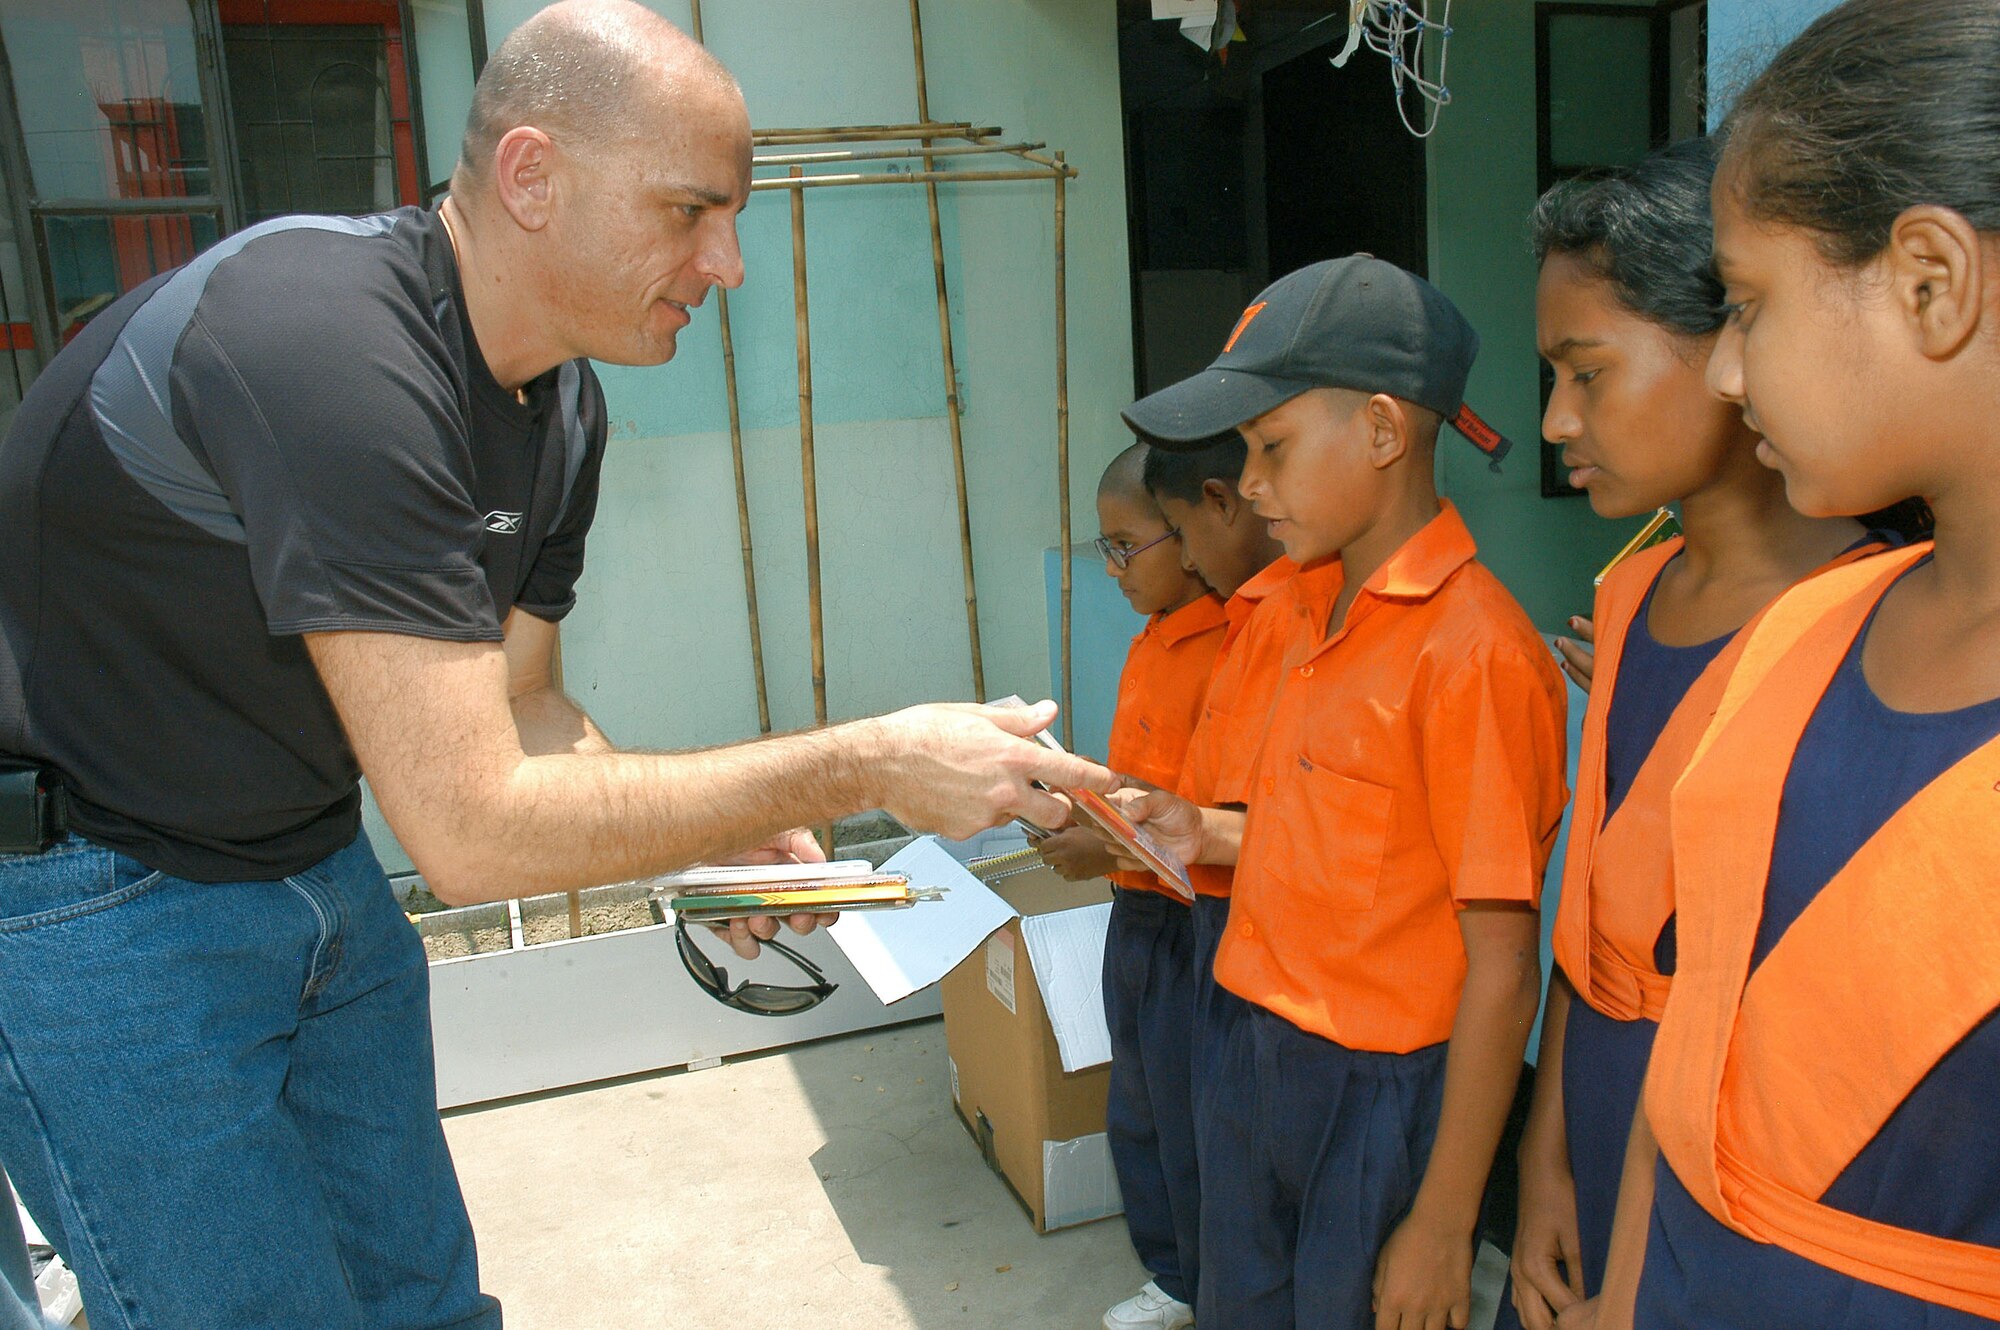 Senior Master Sgt. Jerry Wilkerson distributes school supplies at Eglal's ABC School April 27 in Dhaka, Bangladesh. Sergeant Wilkerson and other members of the 353rd Special Operations Group are training with the Bangladesh air force during Exercise Teak Buffalo. (U.S. Air Force photo/Master Sgt. Marilyn Holliday)                          